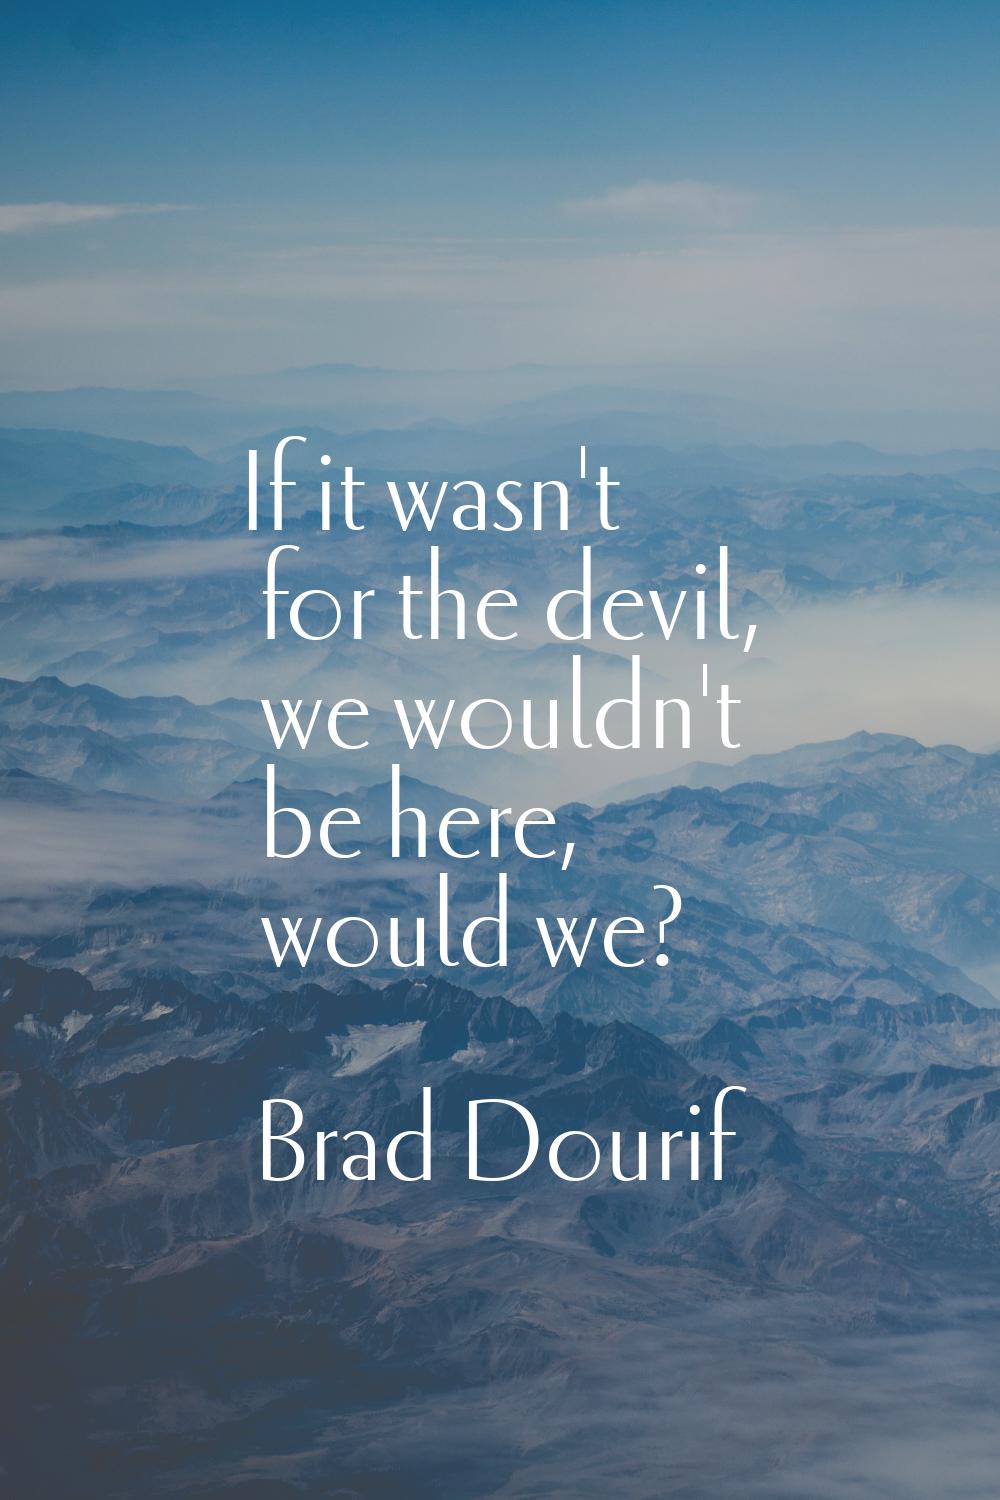 If it wasn't for the devil, we wouldn't be here, would we?